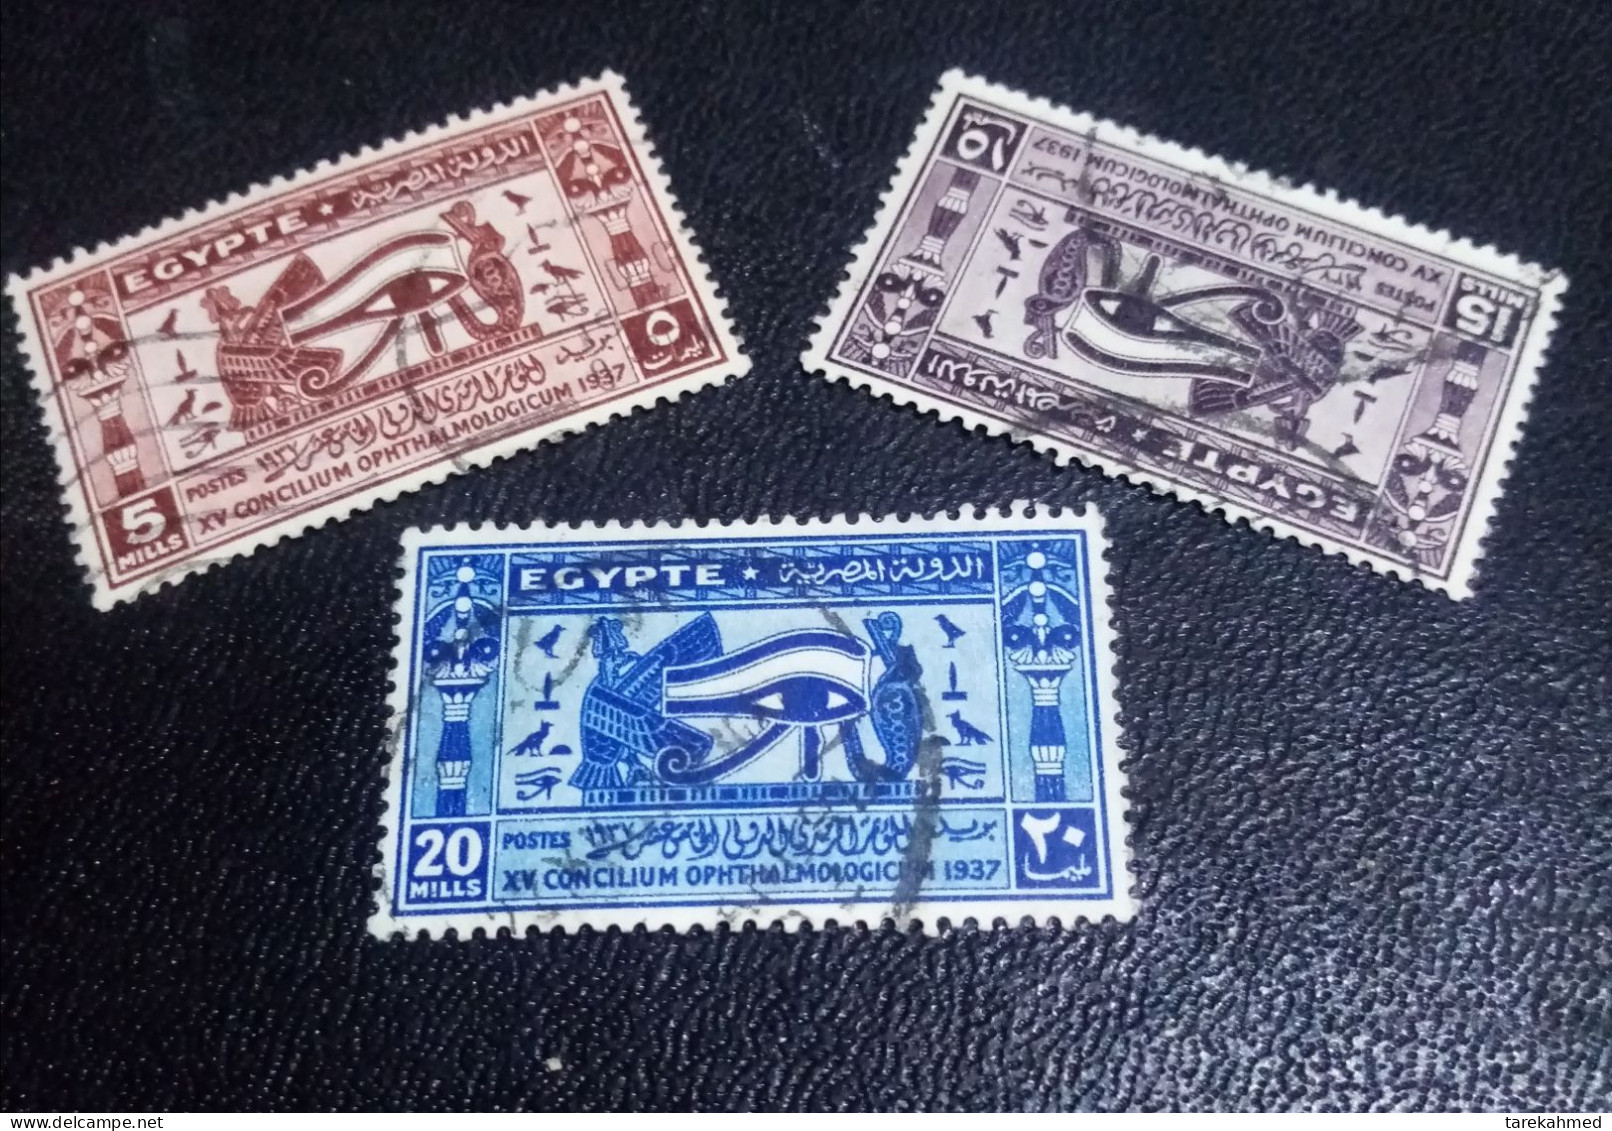 EGYPT 1937, Used Set Of The OPHTHALMOLOGICAL CONGRESS, VF - Used Stamps